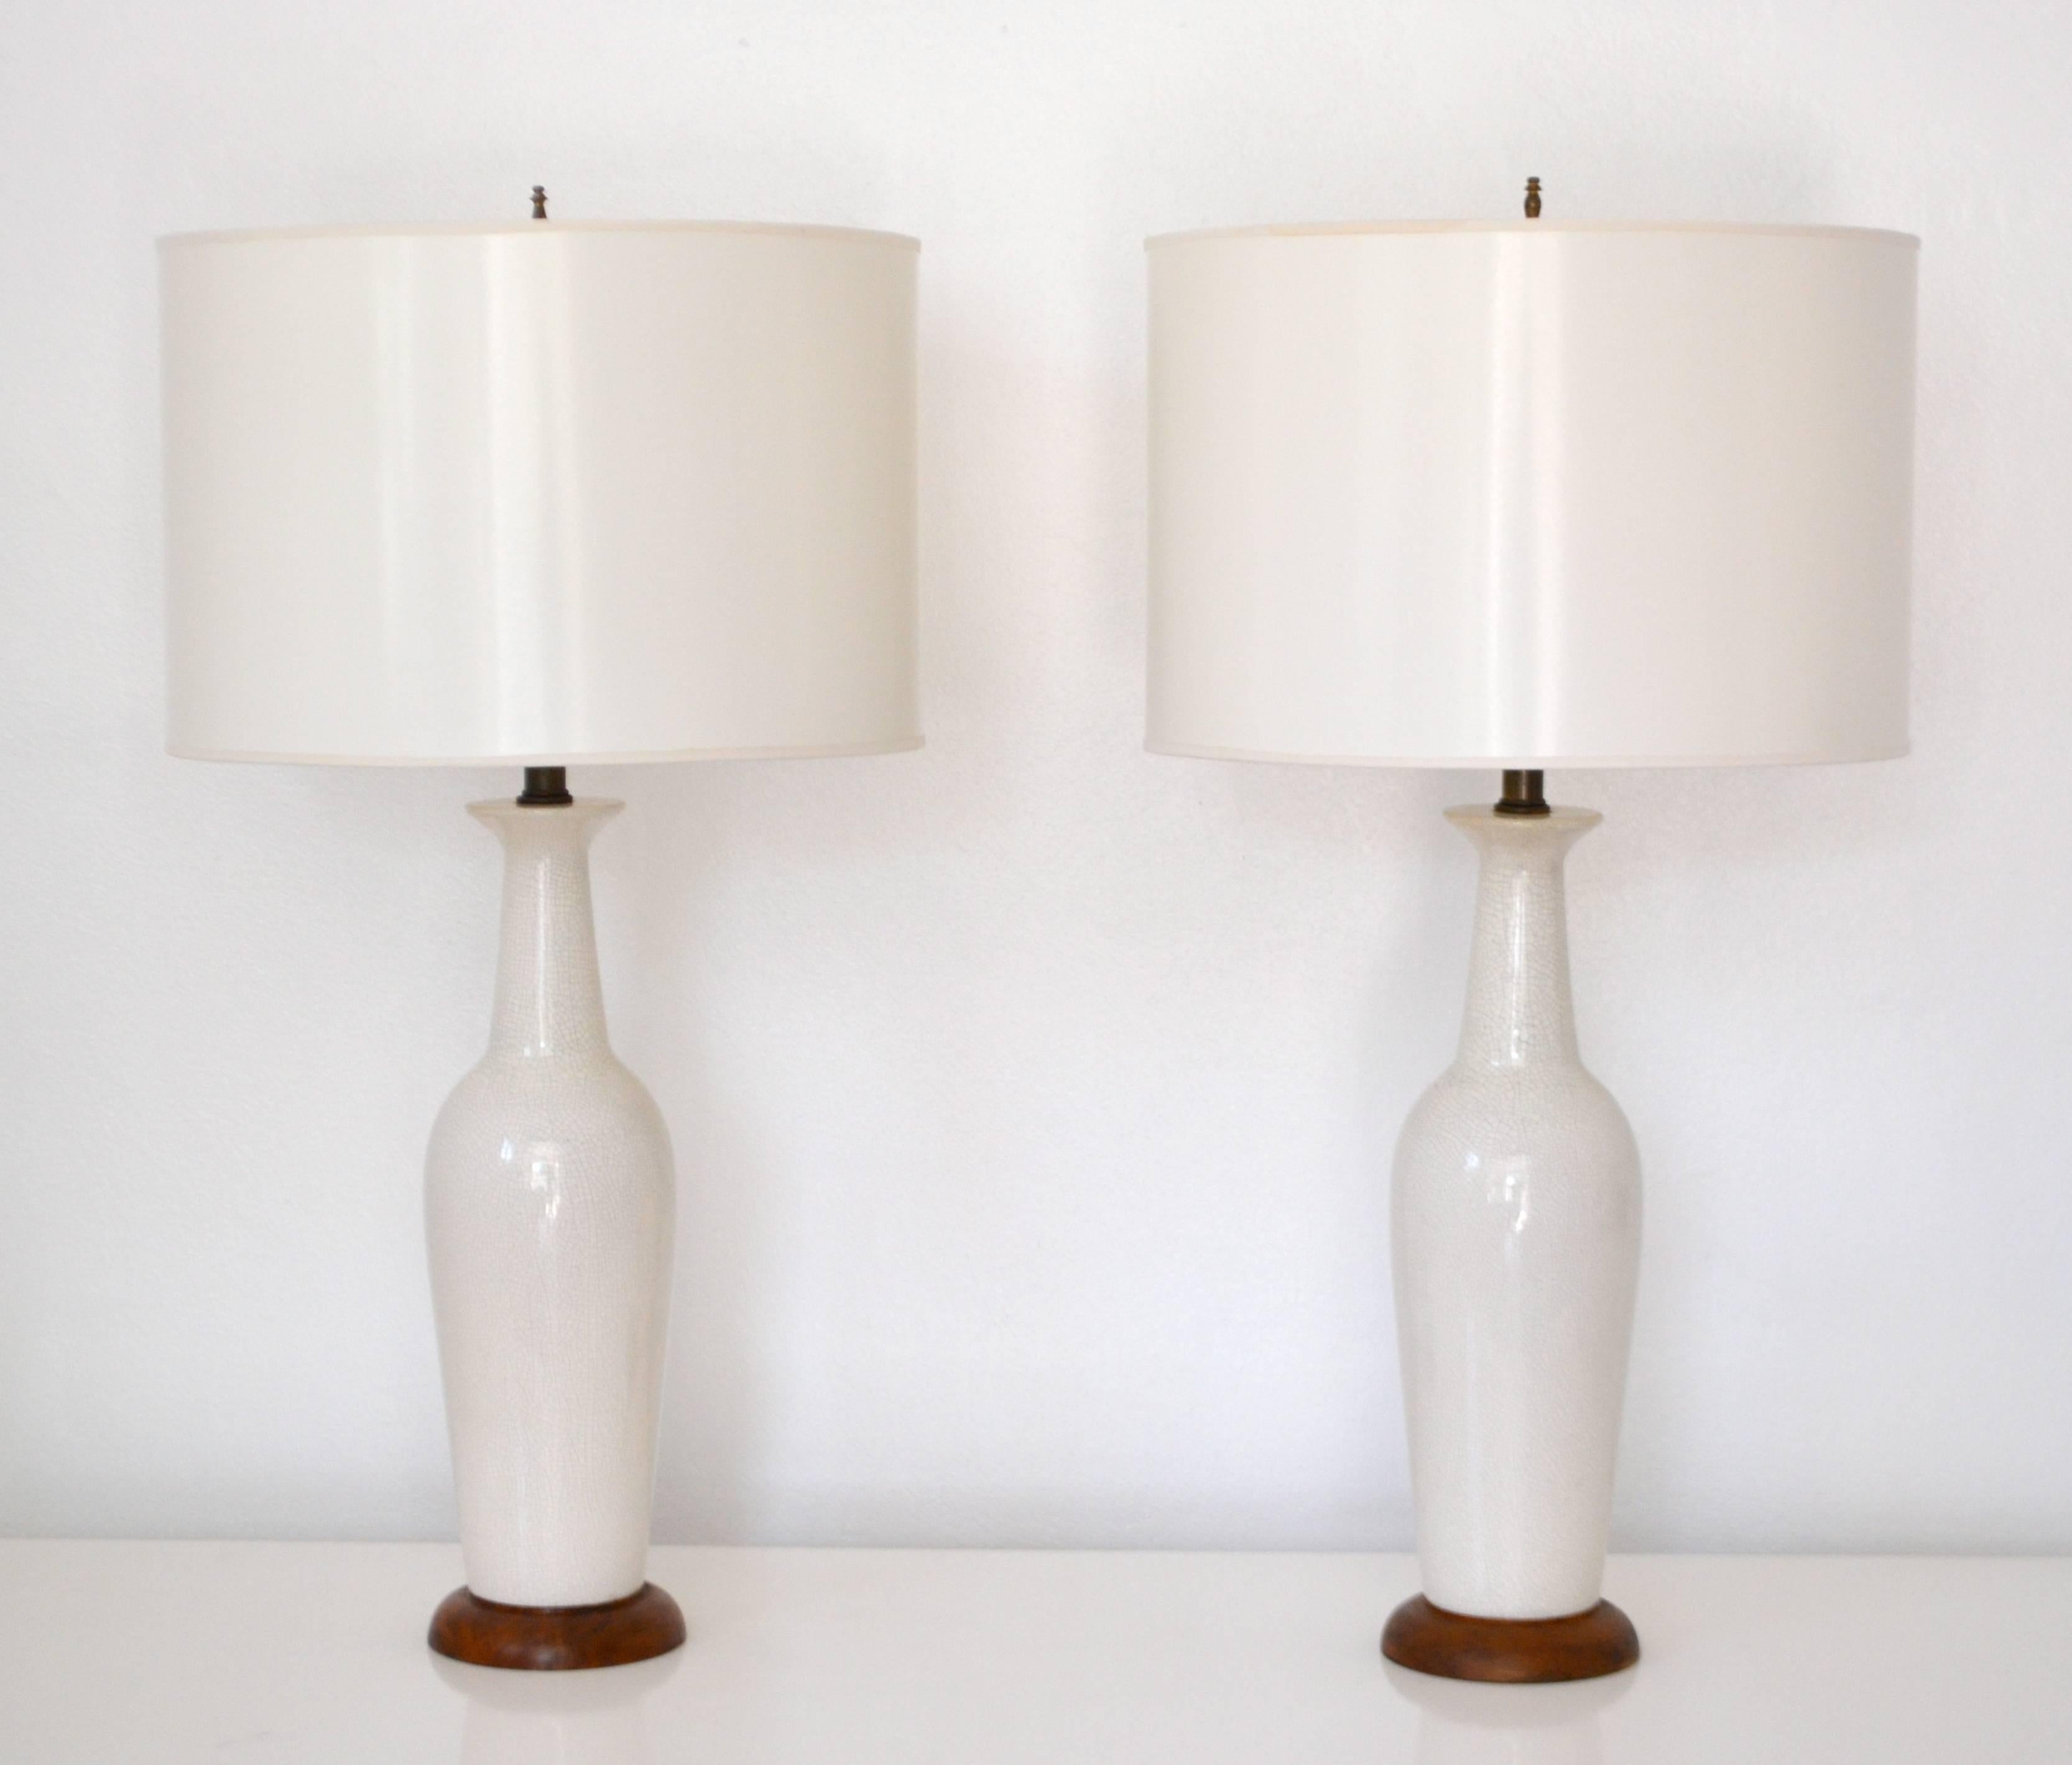 Pair of Midcentury Crackle Glazed Ceramic Bottle Form Table Lamps For Sale 1